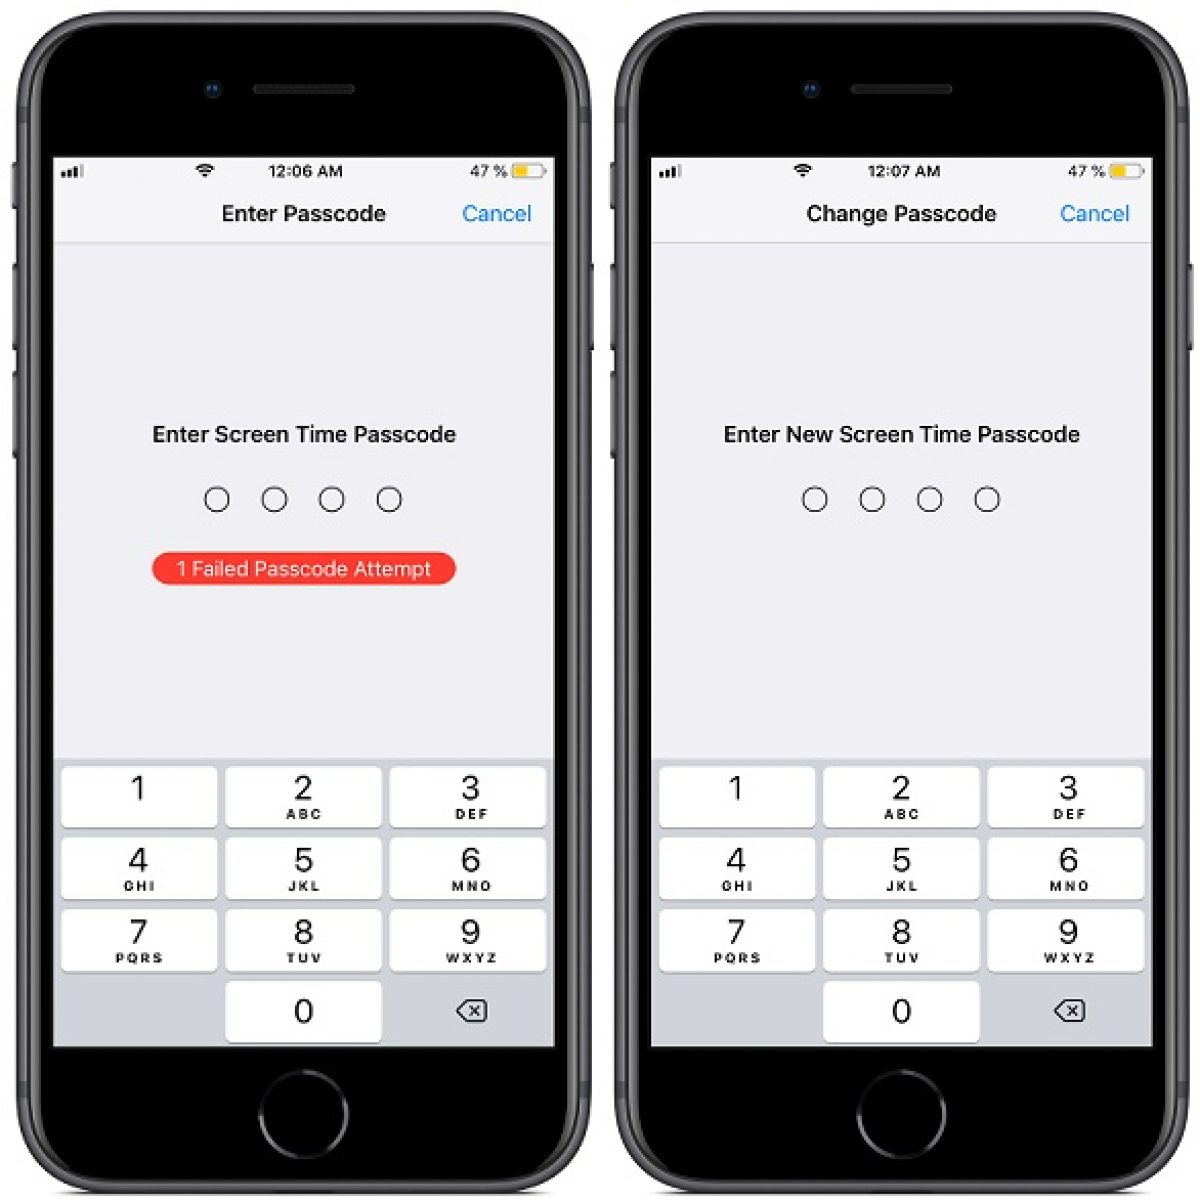 How To Reset The Screen Time Passcode In iOS 12